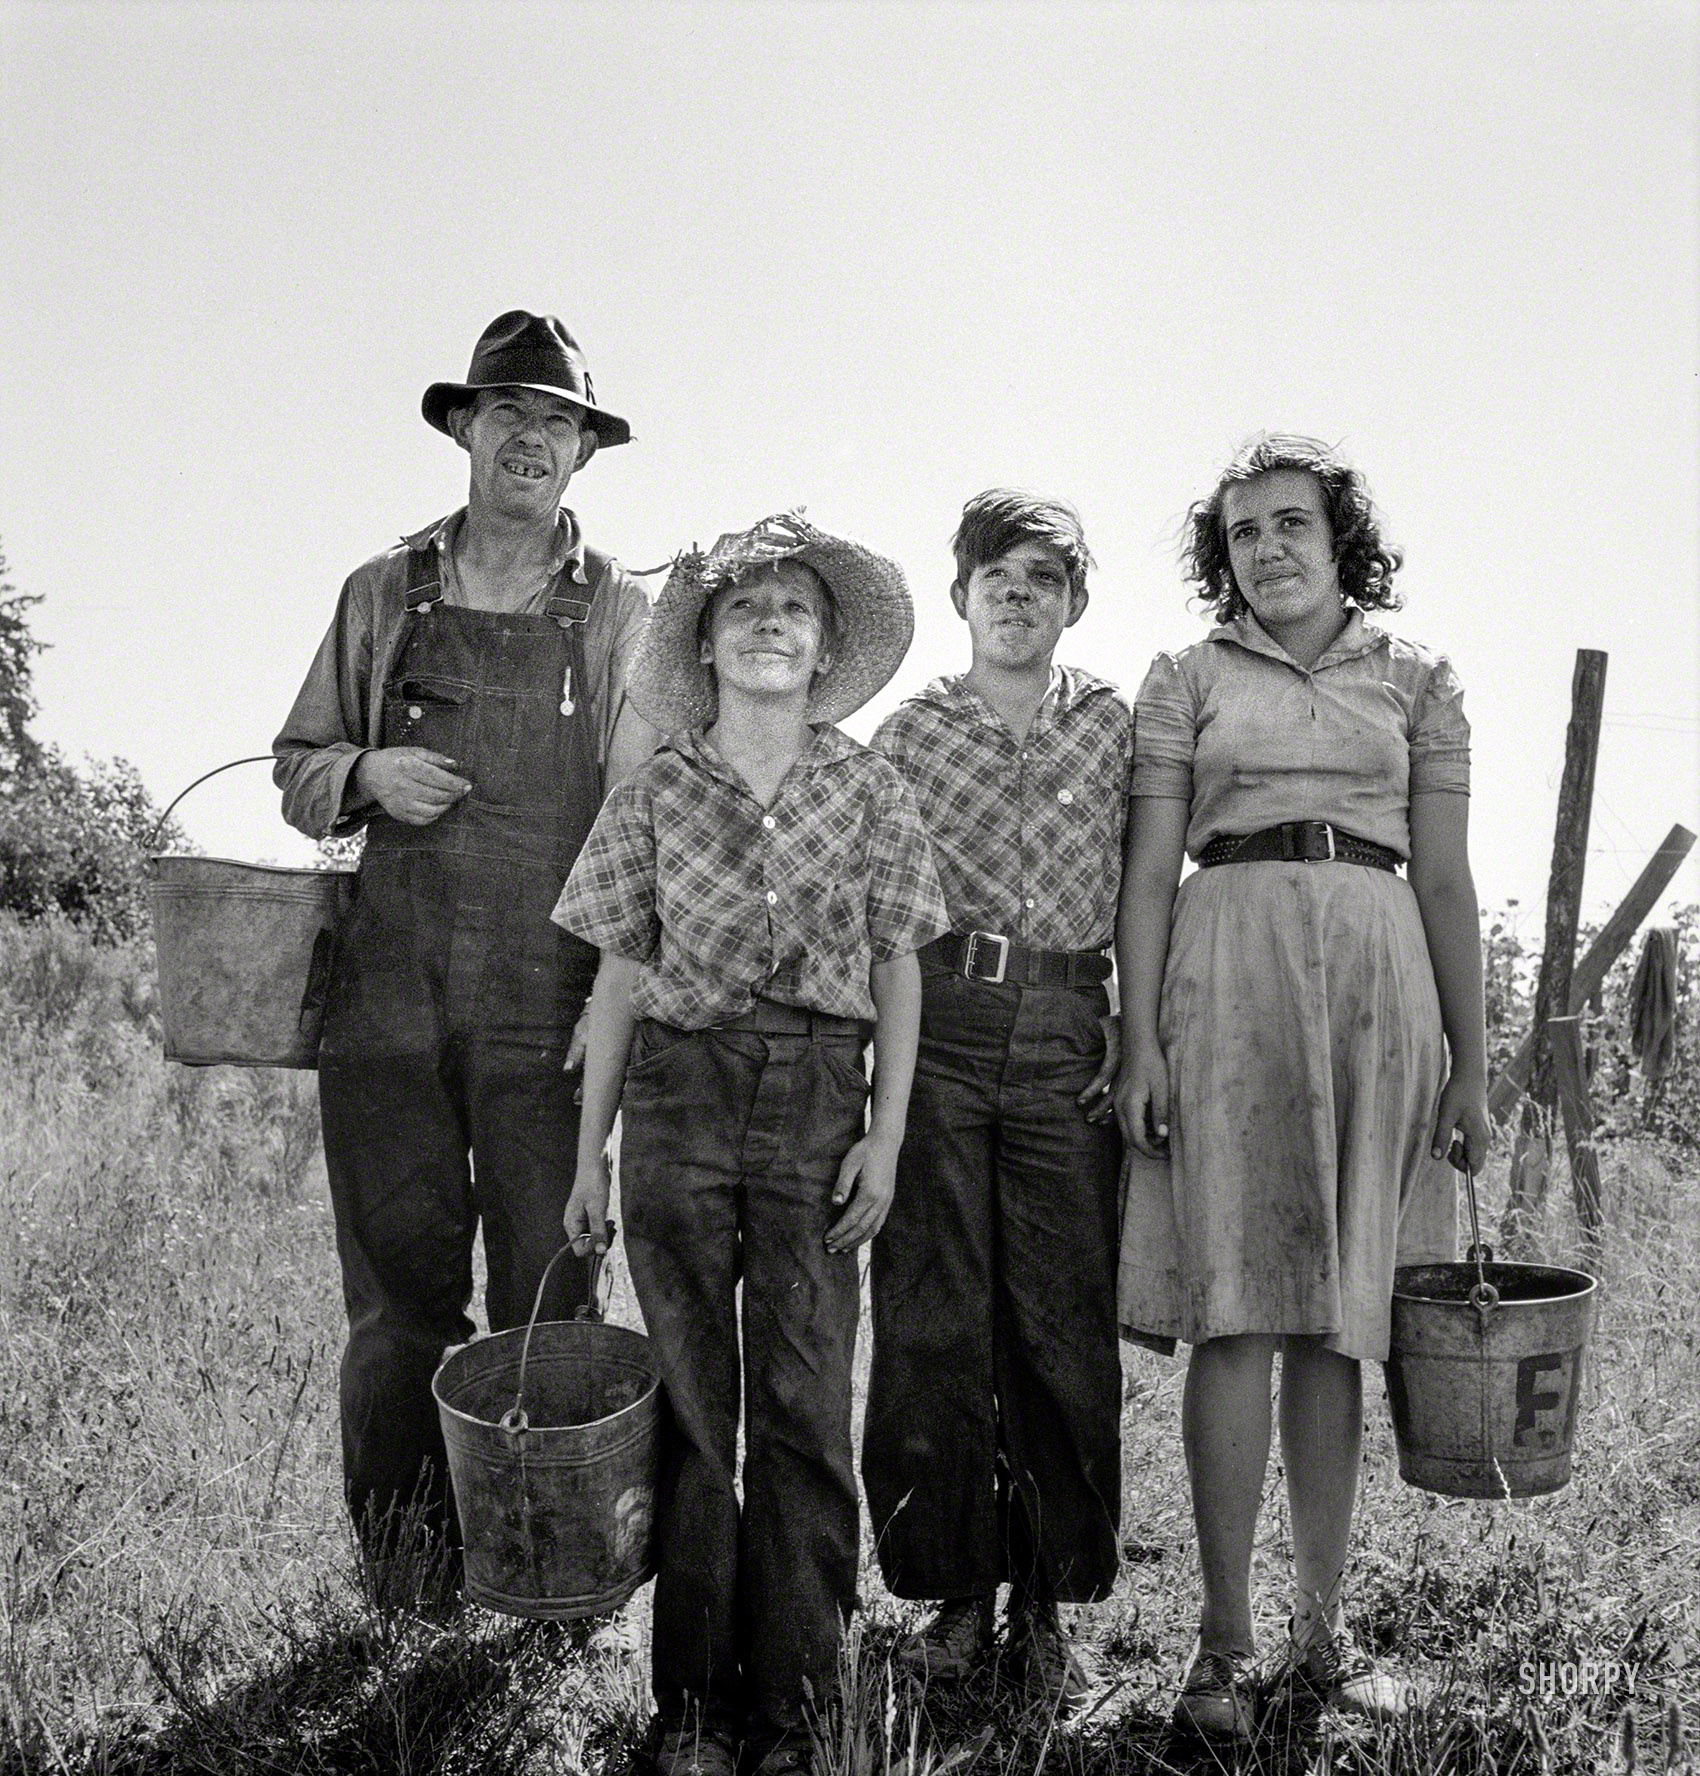 August 1939. "Marion County, Oregon, near West Stayton. Father and children came from Albany, Oregon, for a season's work in the beans." Photo by Dorothea Lange for the Resettlement Administration. View full size.